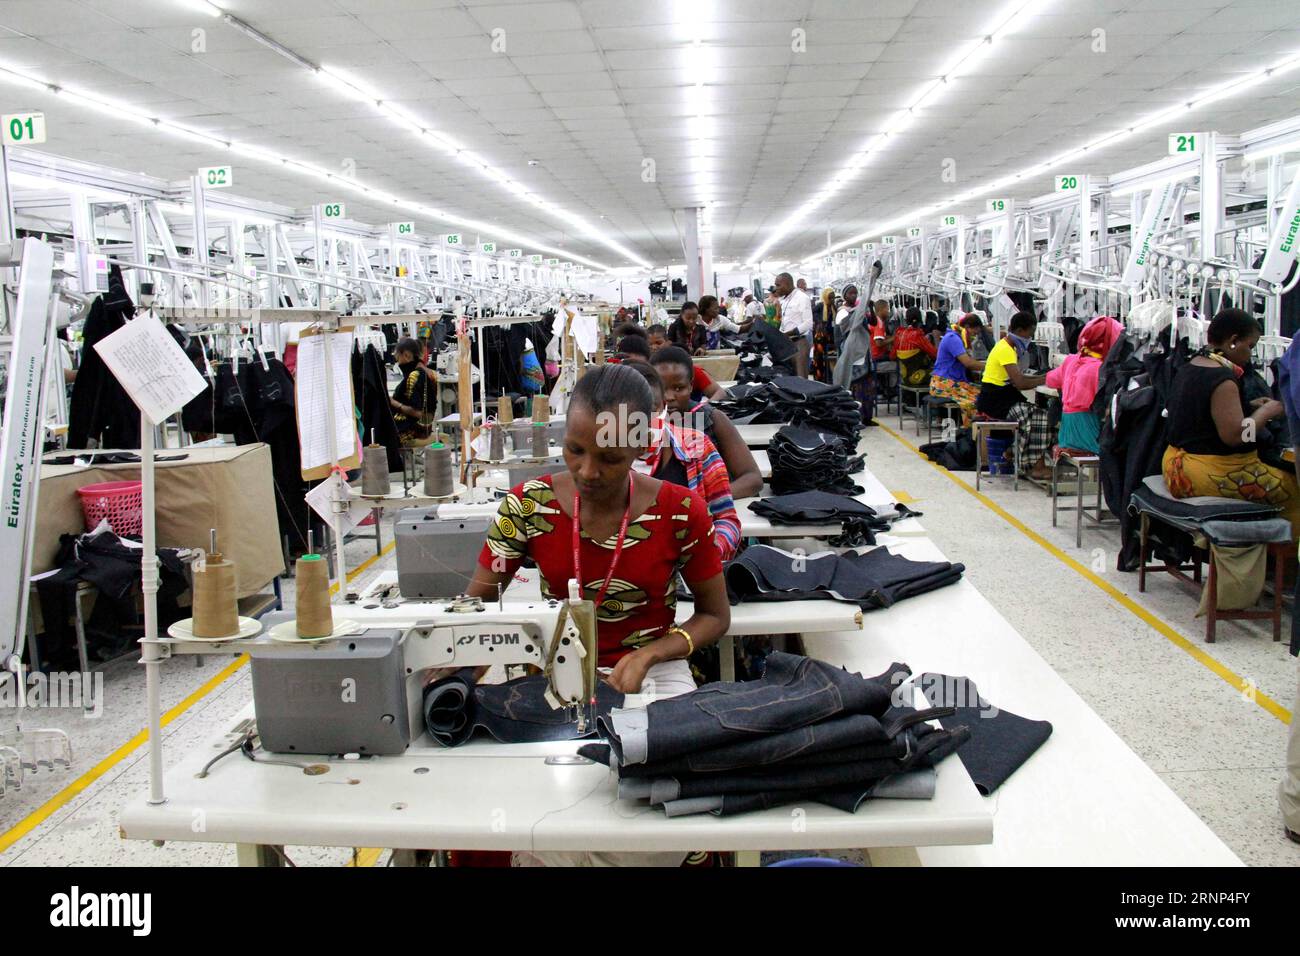 (170810) -- DAR ES SALAAM, Aug. 10, 2017 -- Photo taken on Aug. 7 shows local people working in Chinese-invested Tooku Garments Company Limited in Benjamin Mkapa Export Processing Zone in Dar es Salaam, Tanzania. Some 2,700 Tanzanians are employed by the Chinese garments manufacturing firm which started operations in February 2012 by building a sewing and washing factory with sewage treatment, a generator and other infrastructure. ) TANZANIA-DAR ES SALAAM-CHINESE FIRM LixSibo PUBLICATIONxNOTxINxCHN   dar it Salaam Aug 10 2017 Photo Taken ON Aug 7 Shows Local Celebrities Working in Chinese Inve Stock Photo